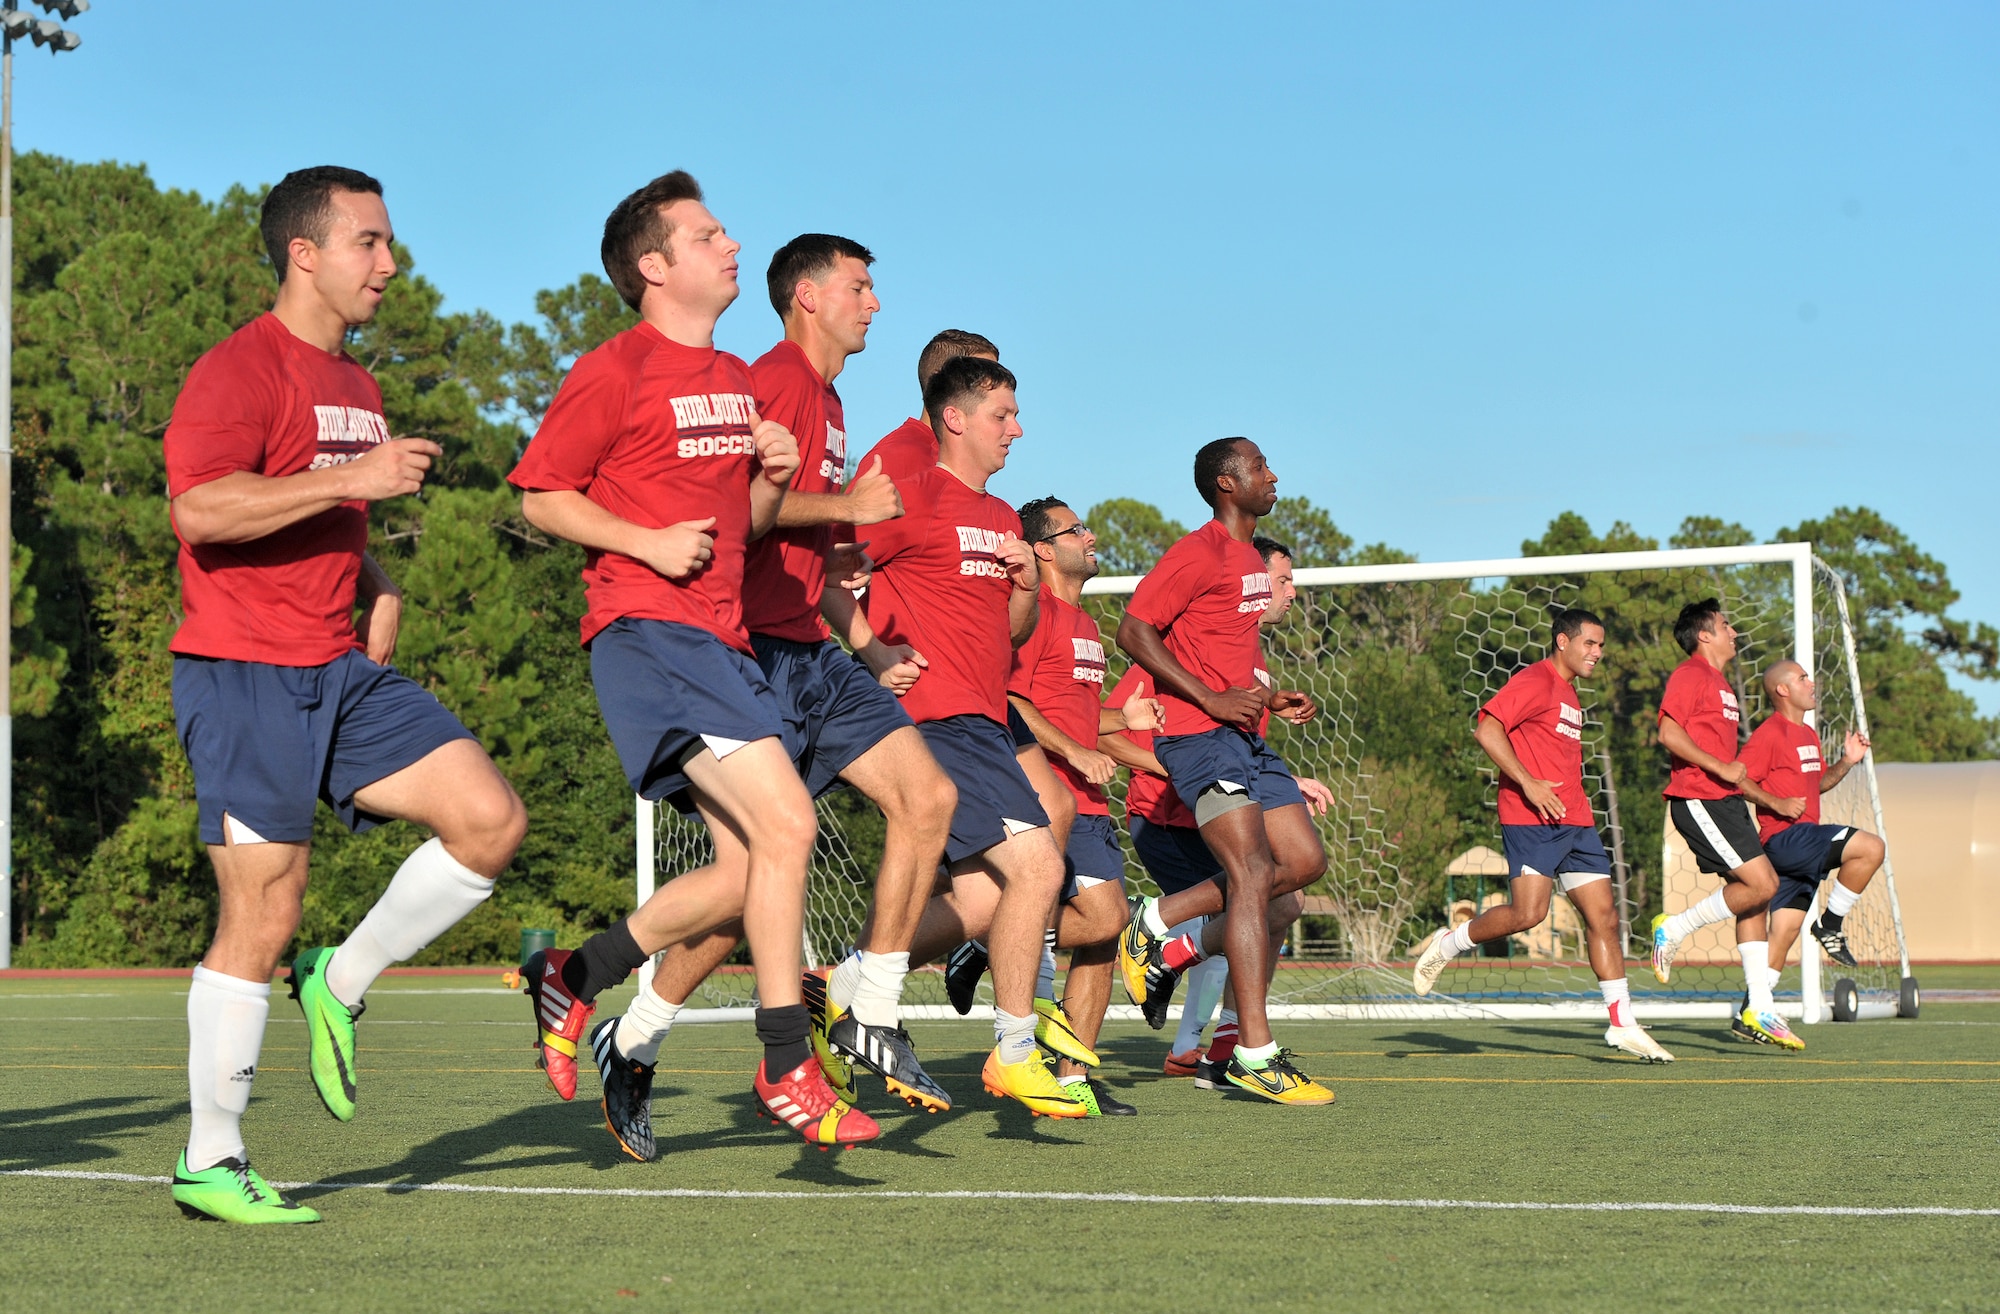 The Hurburt Field Soccer Team warms up with light jogs and sprints before beginning practice at the Aderholt Fitness Center Aug. 26, 2014. The players will be facing teams from other bases and services during the 2014 Department of Defense Soccer Tournament at Lackland Air Force Base, Texas this Labor Day weekend. (U.S. Air Force photo/Senior Airman Kentavist P. Brackin)